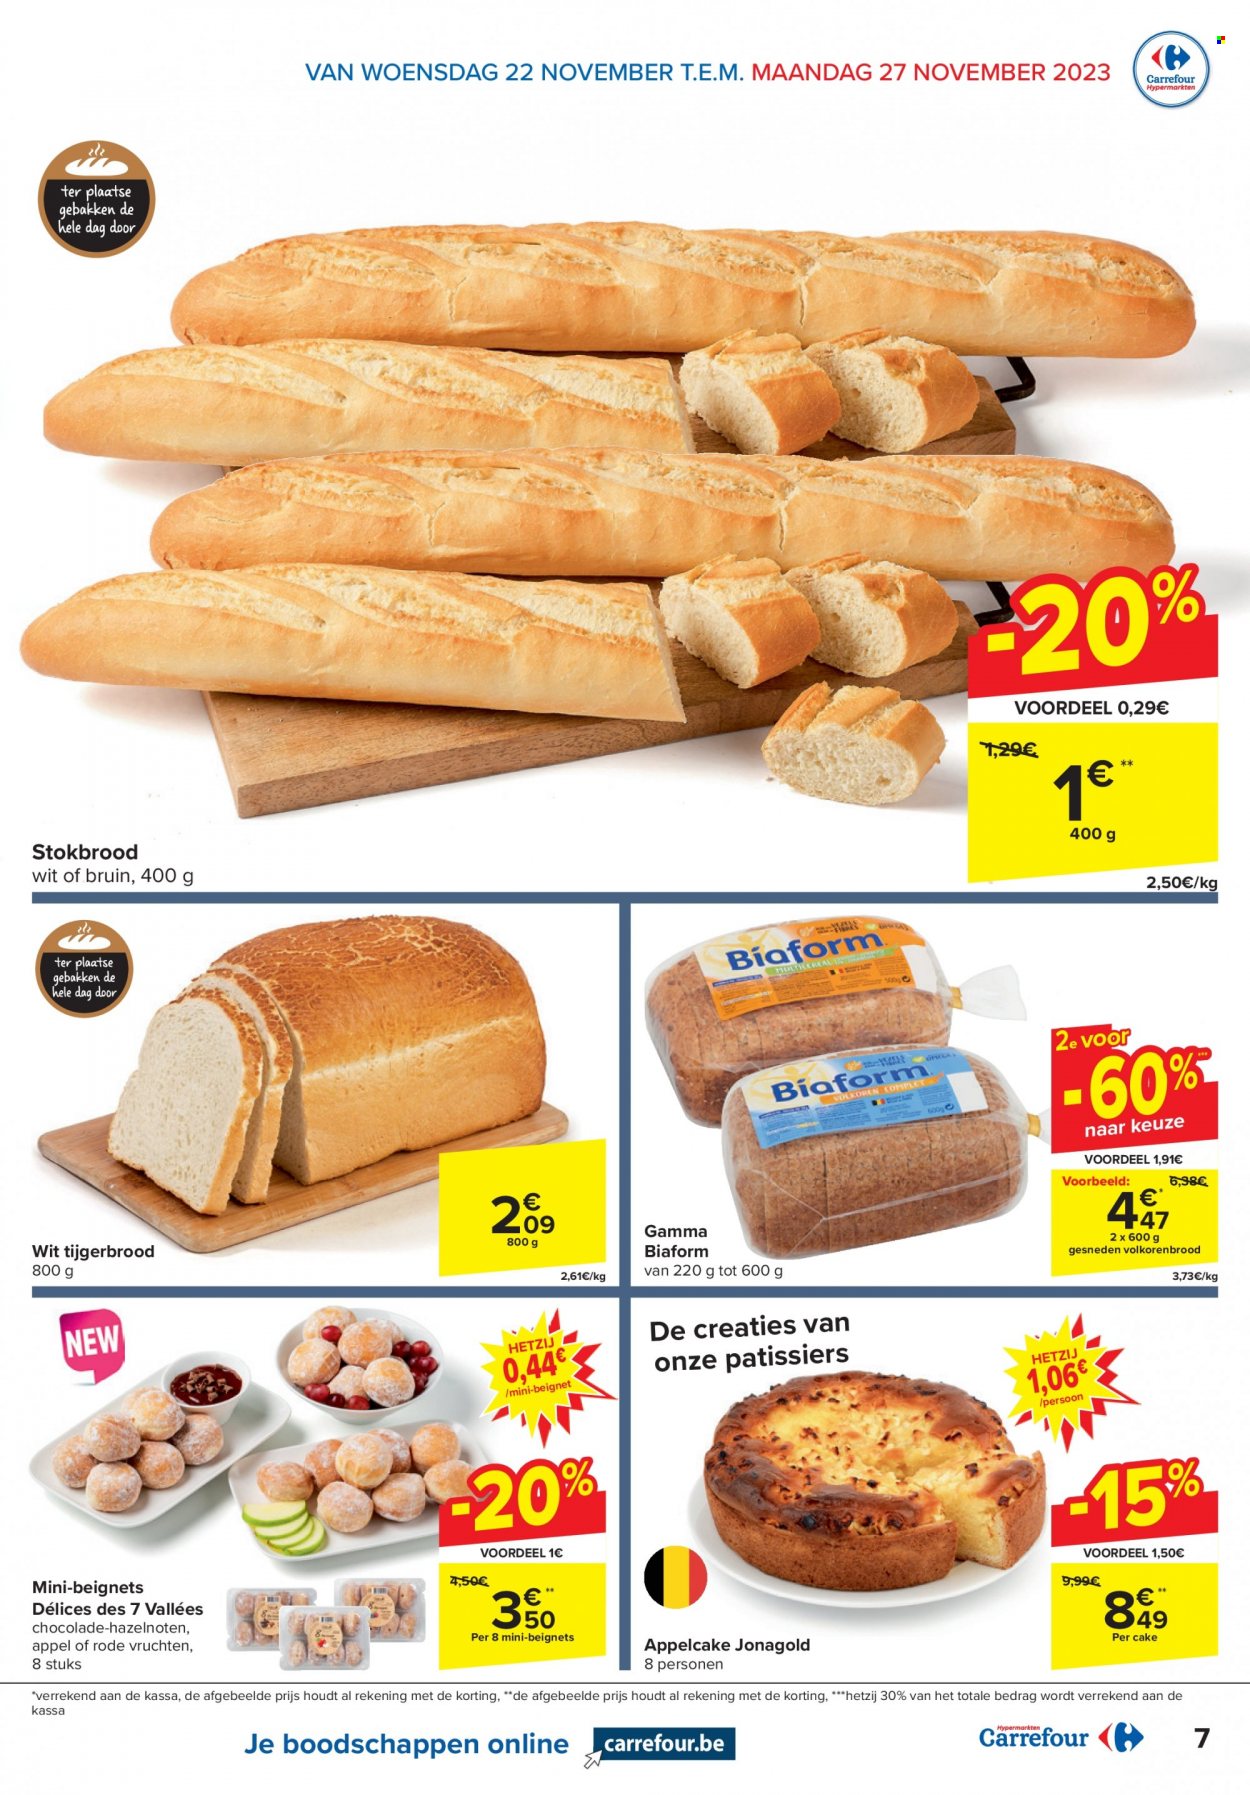 Catalogue Carrefour hypermarkt - 22.11.2023 - 4.12.2023. Page 7.